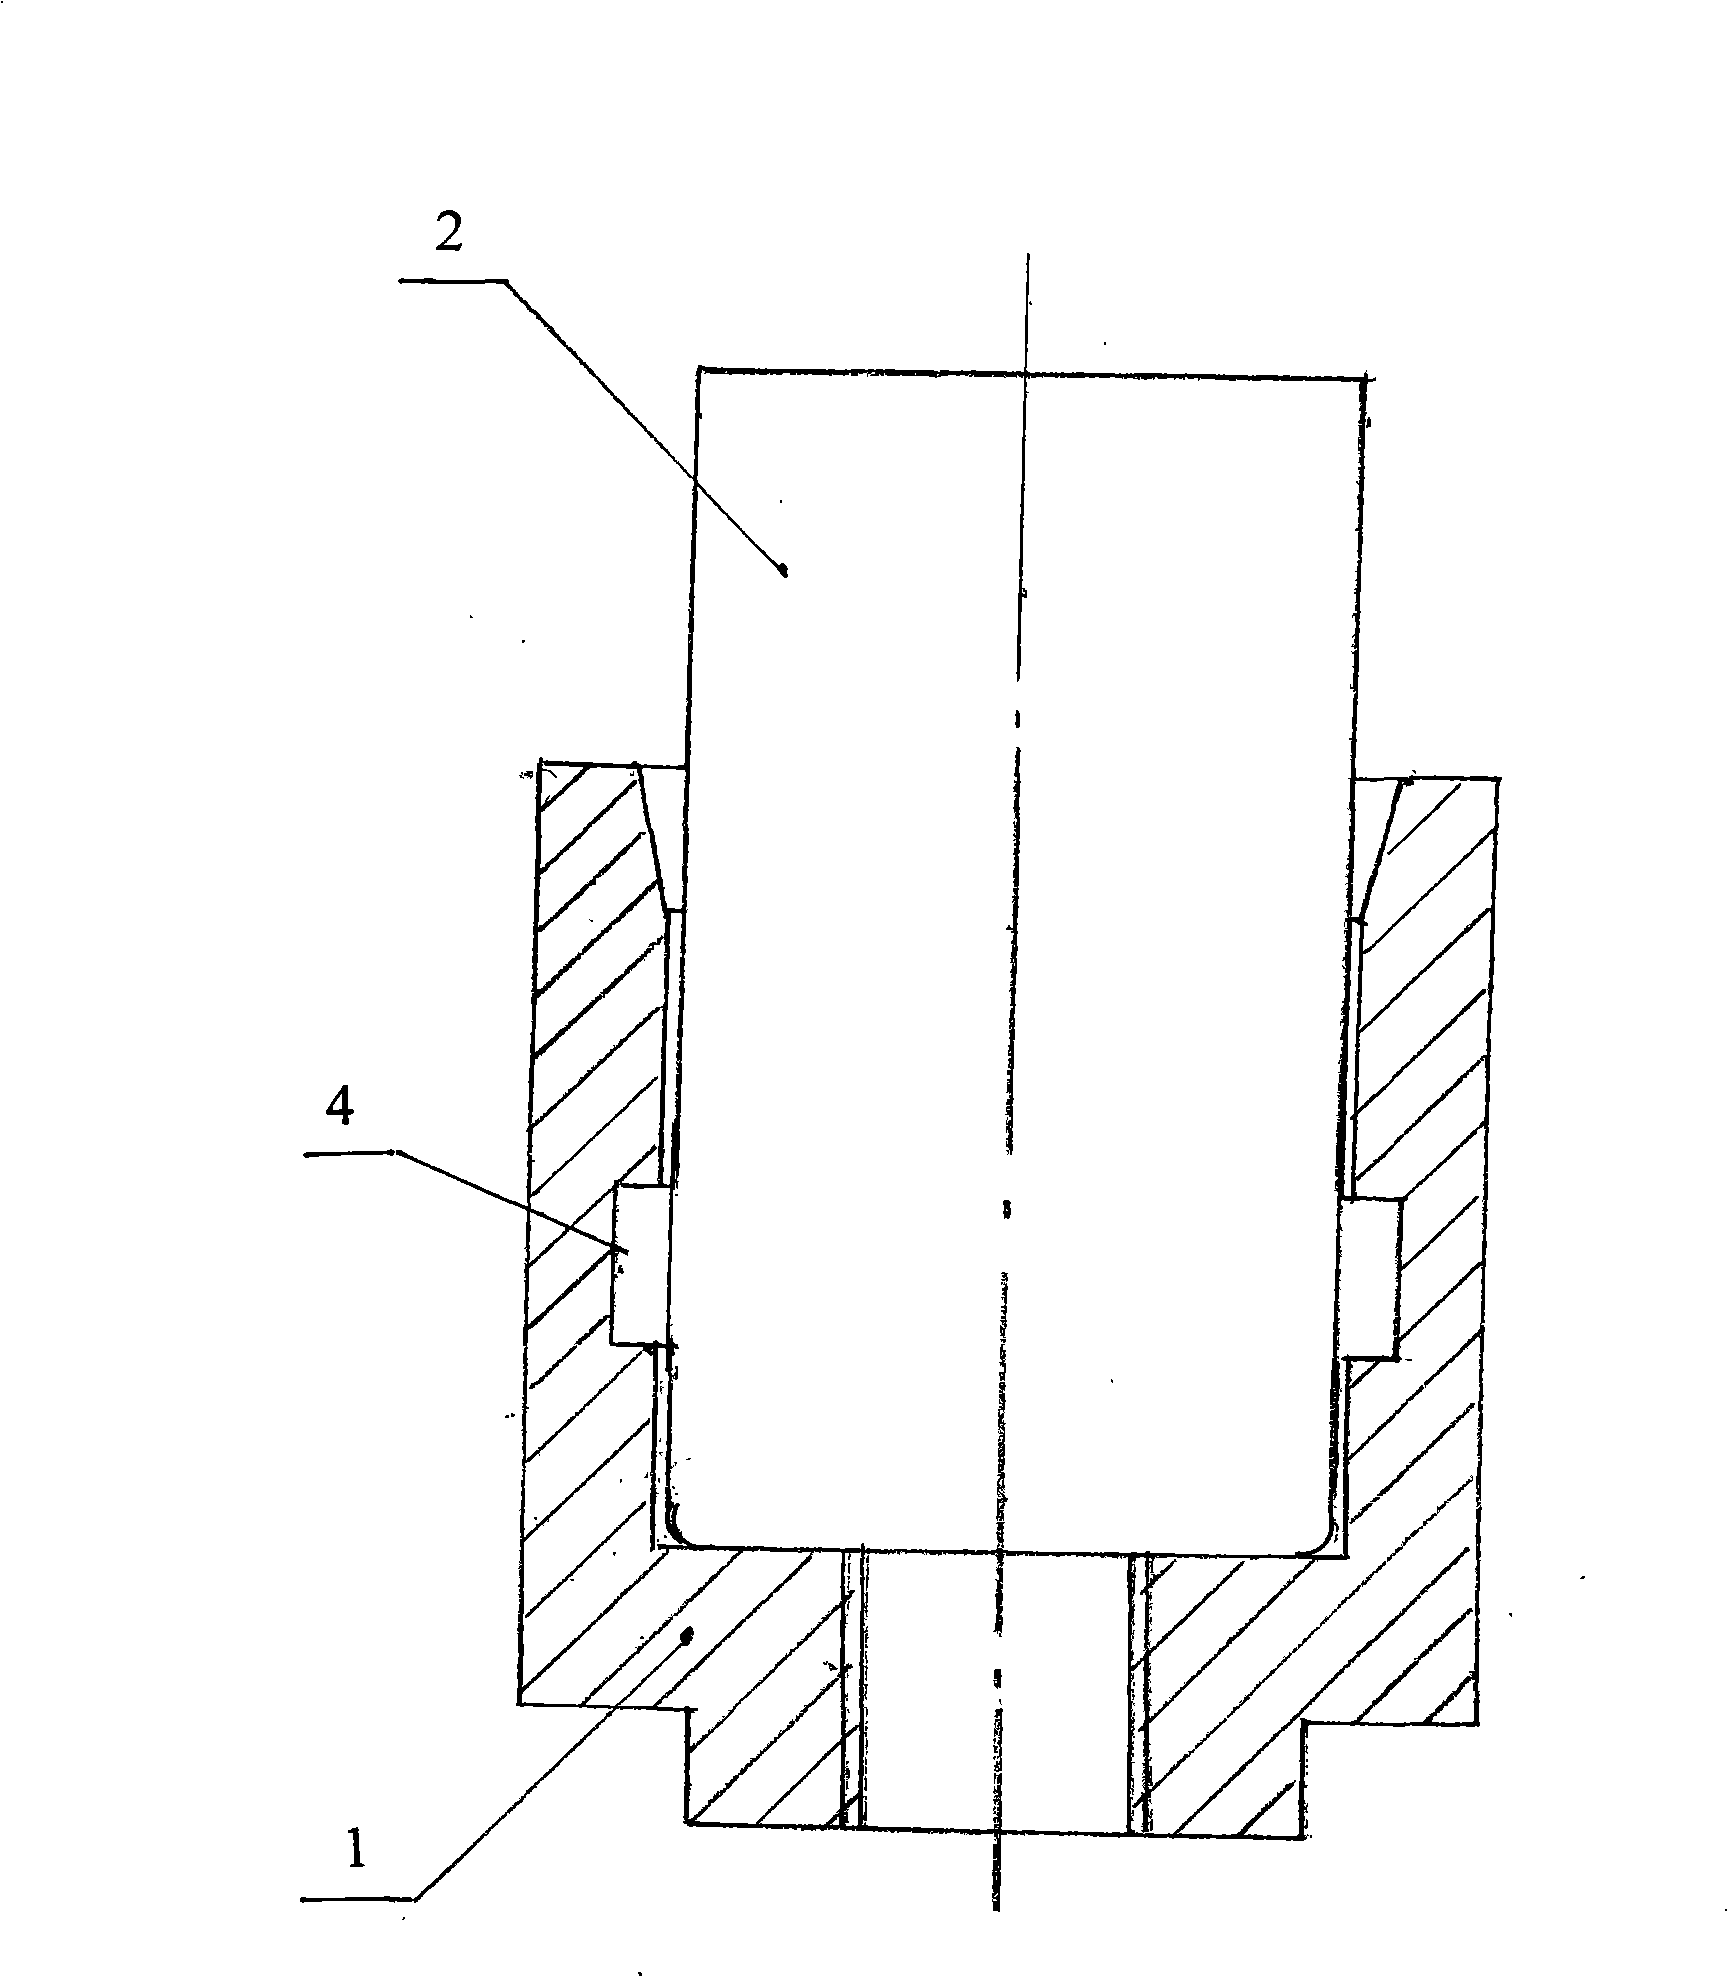 Hydraulic expanding type movable joint